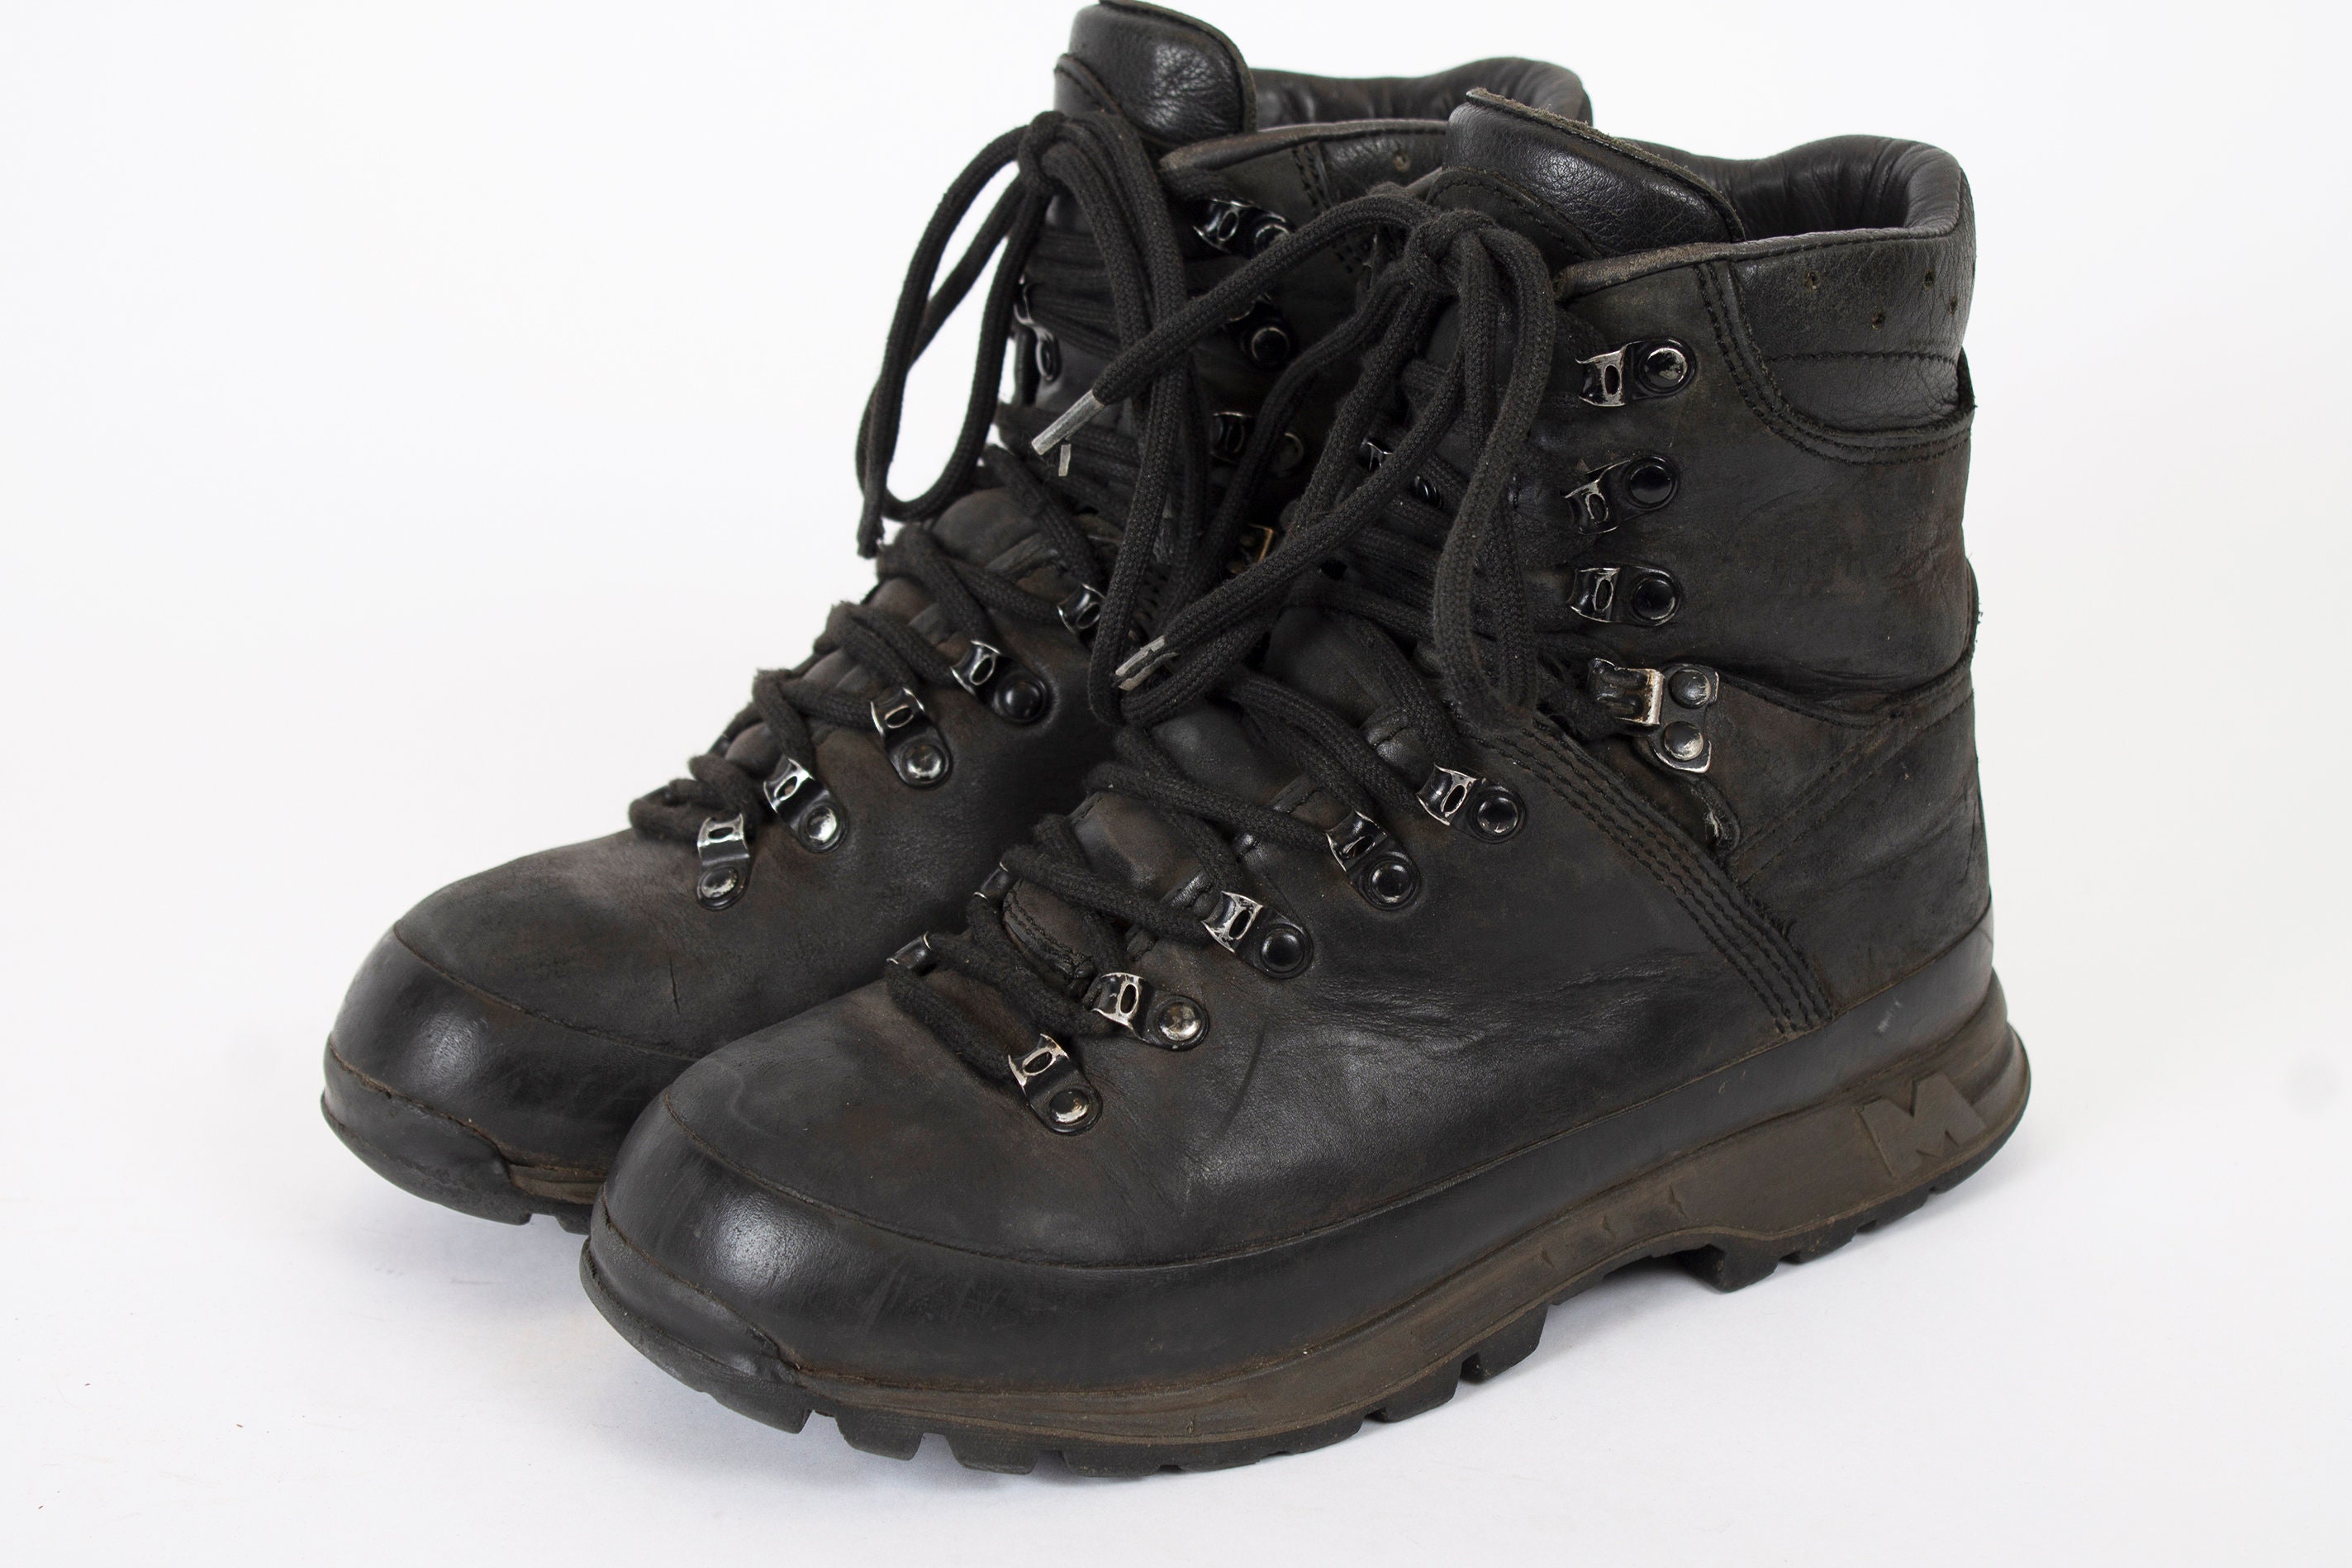 Junior Steen strip US8.5 Black Army Meindl Military-grade M1 Army Issued Boots - Etsy